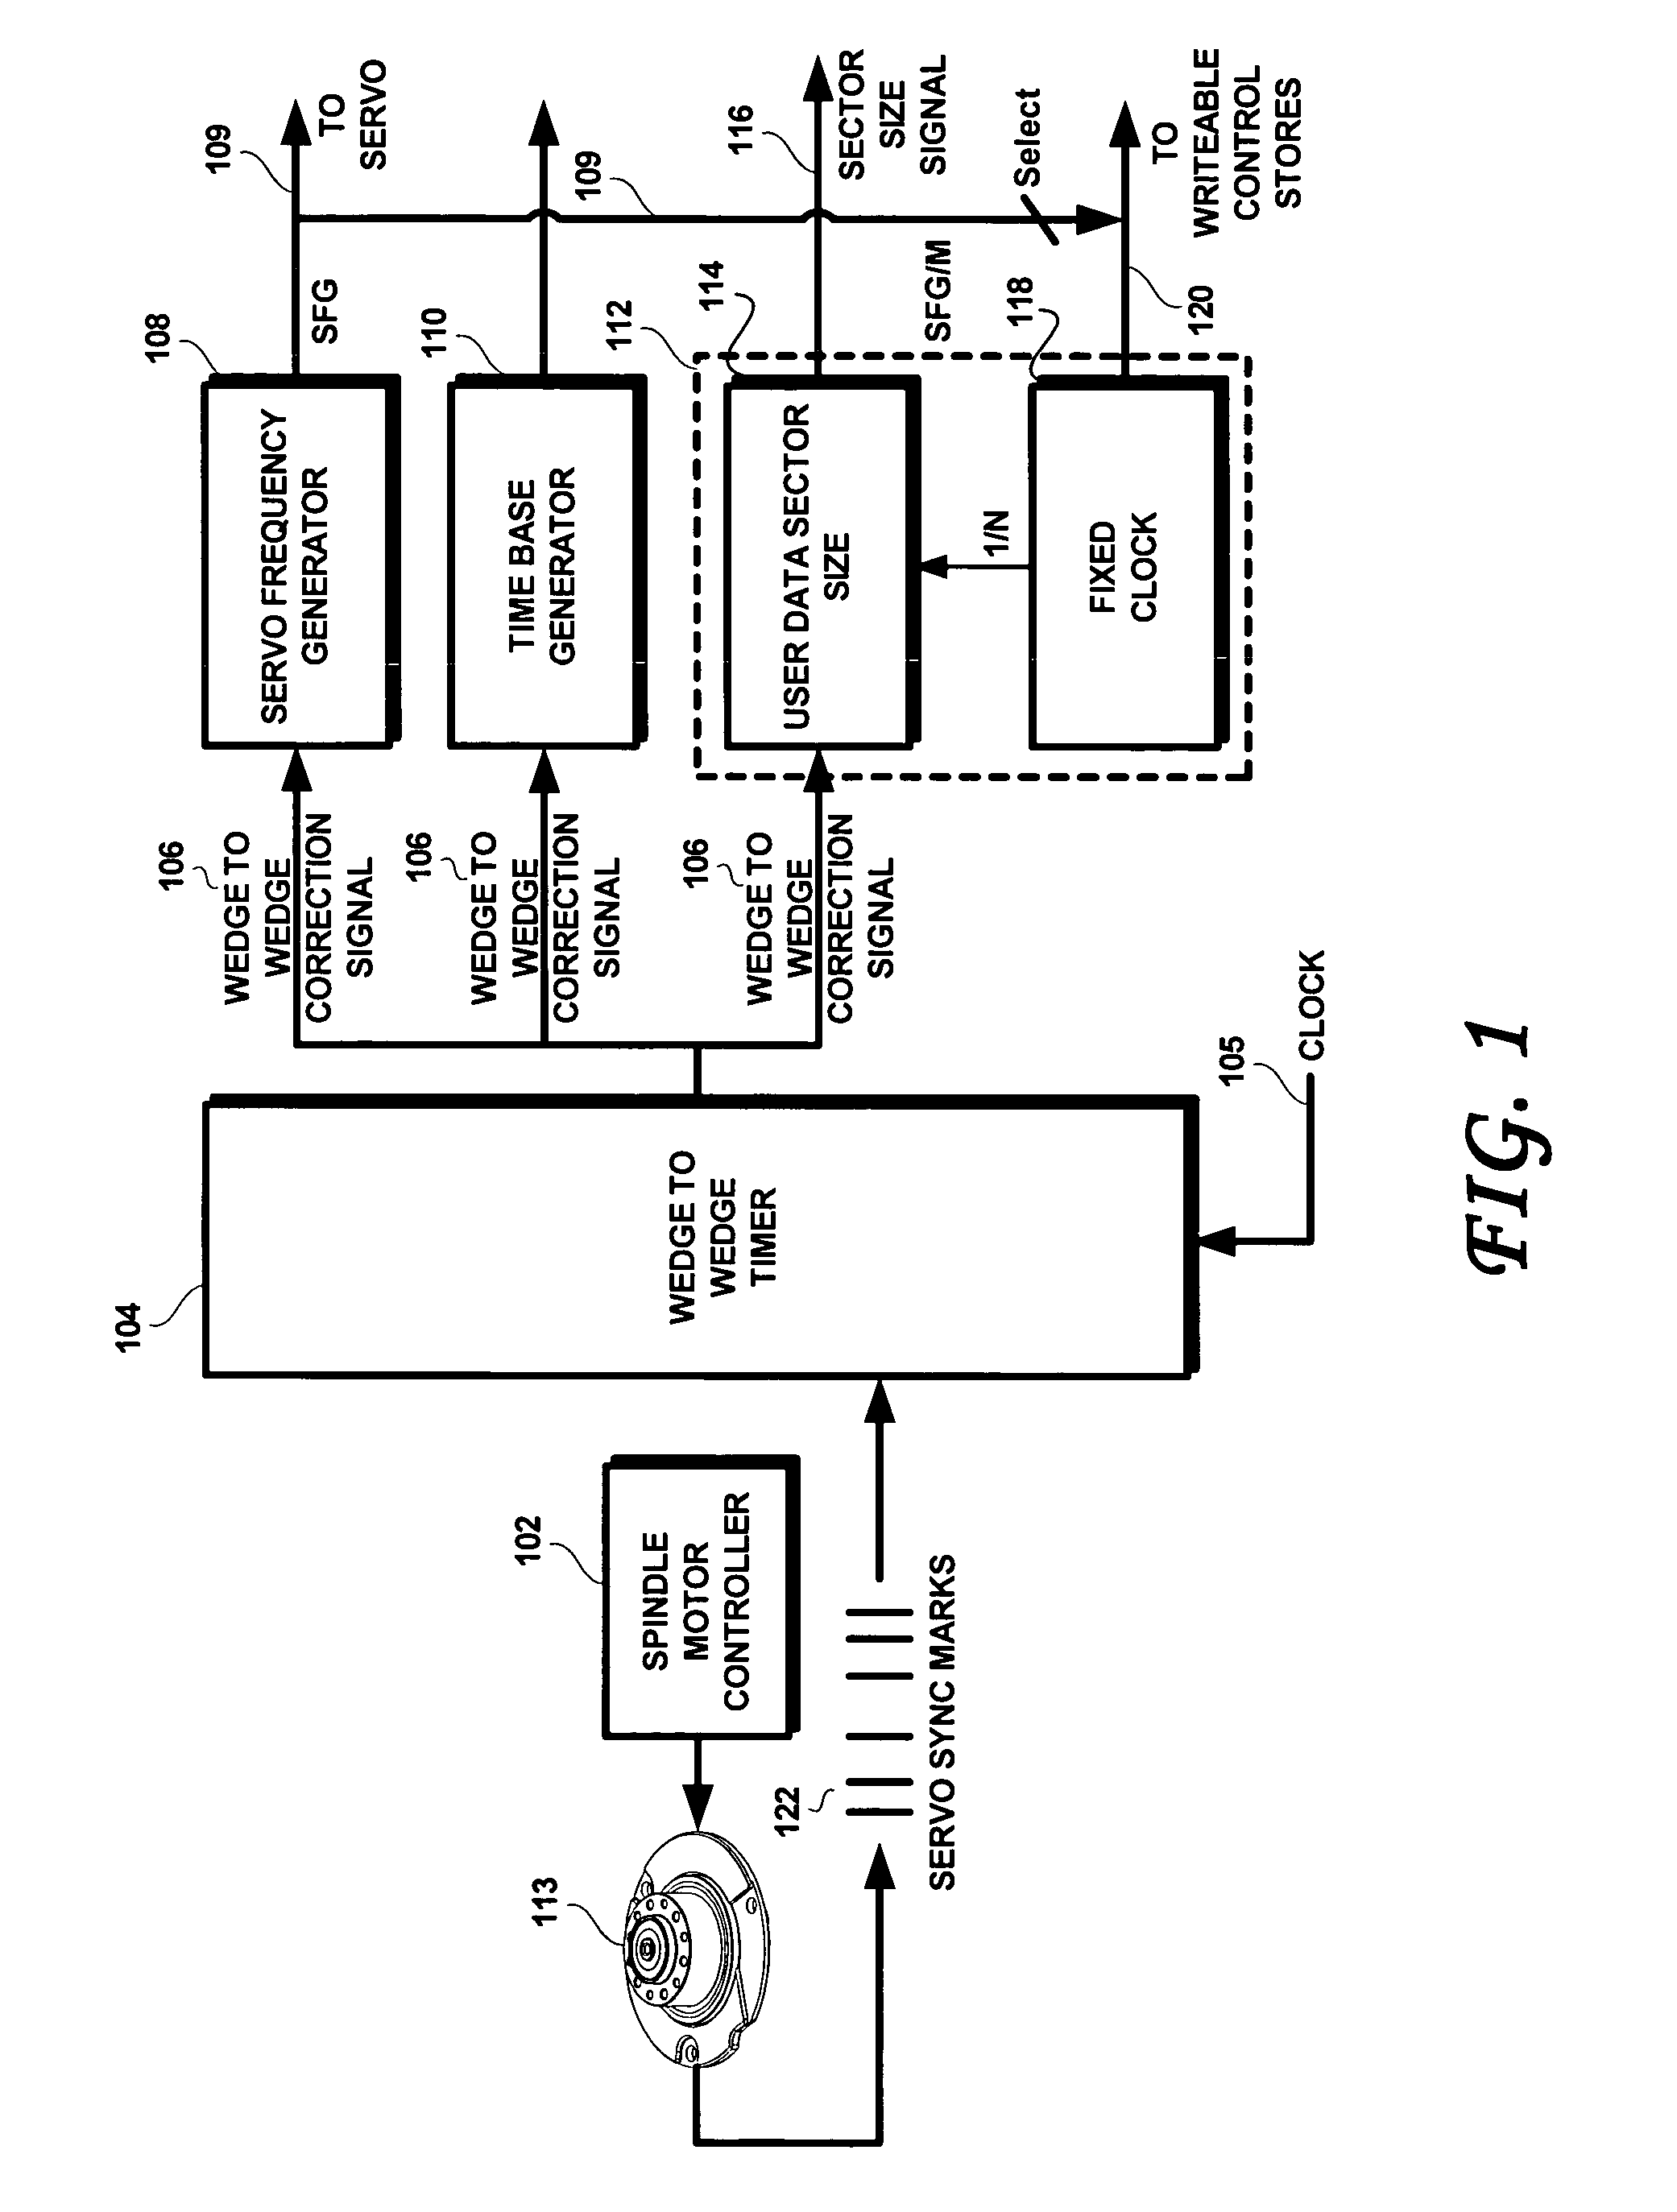 Disk drive having adaptively-sized sectors to compensate for disk eccentricity